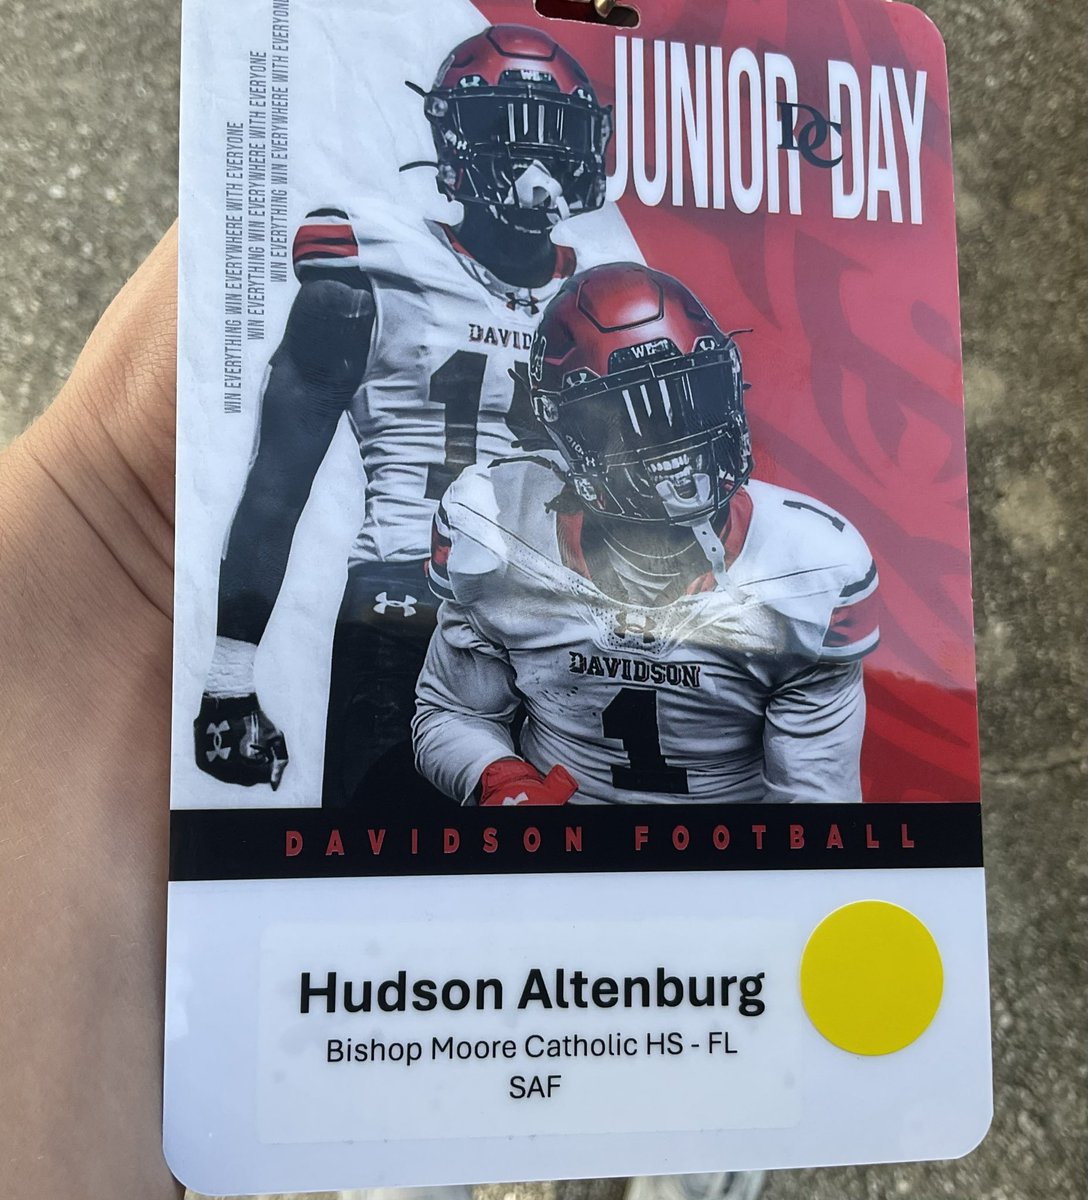 Had a great time at @DavidsonFB Junior day. Thank you @_CoachMunch and @Scott_AbellFB for having me up, can’t wait to be back!!